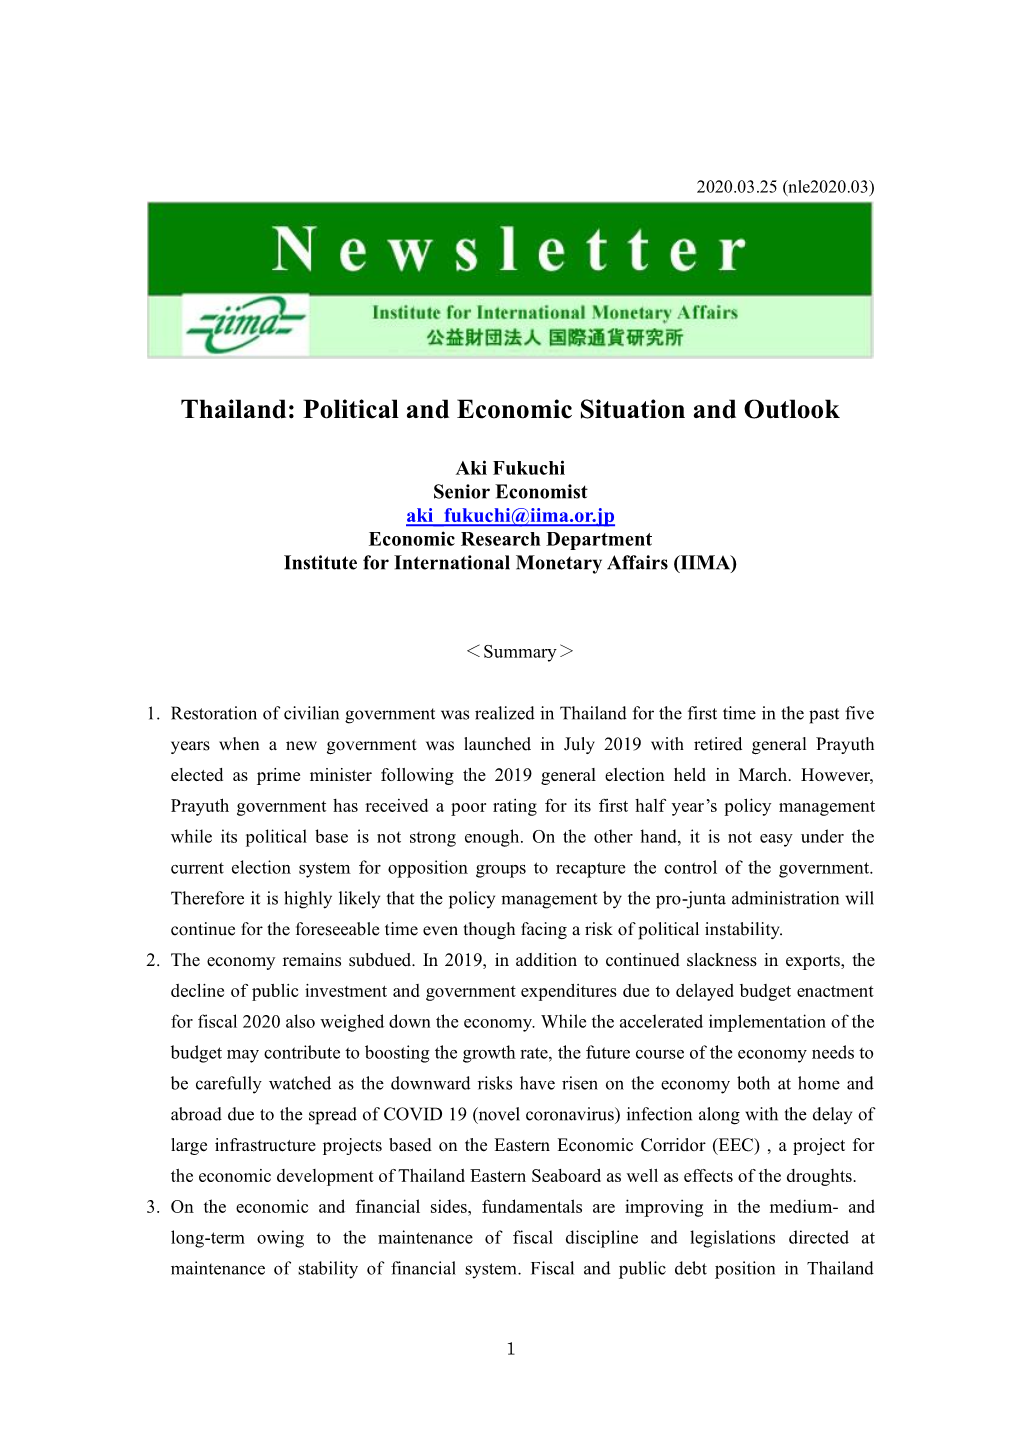 Thailand: Political and Economic Situation and Outlook